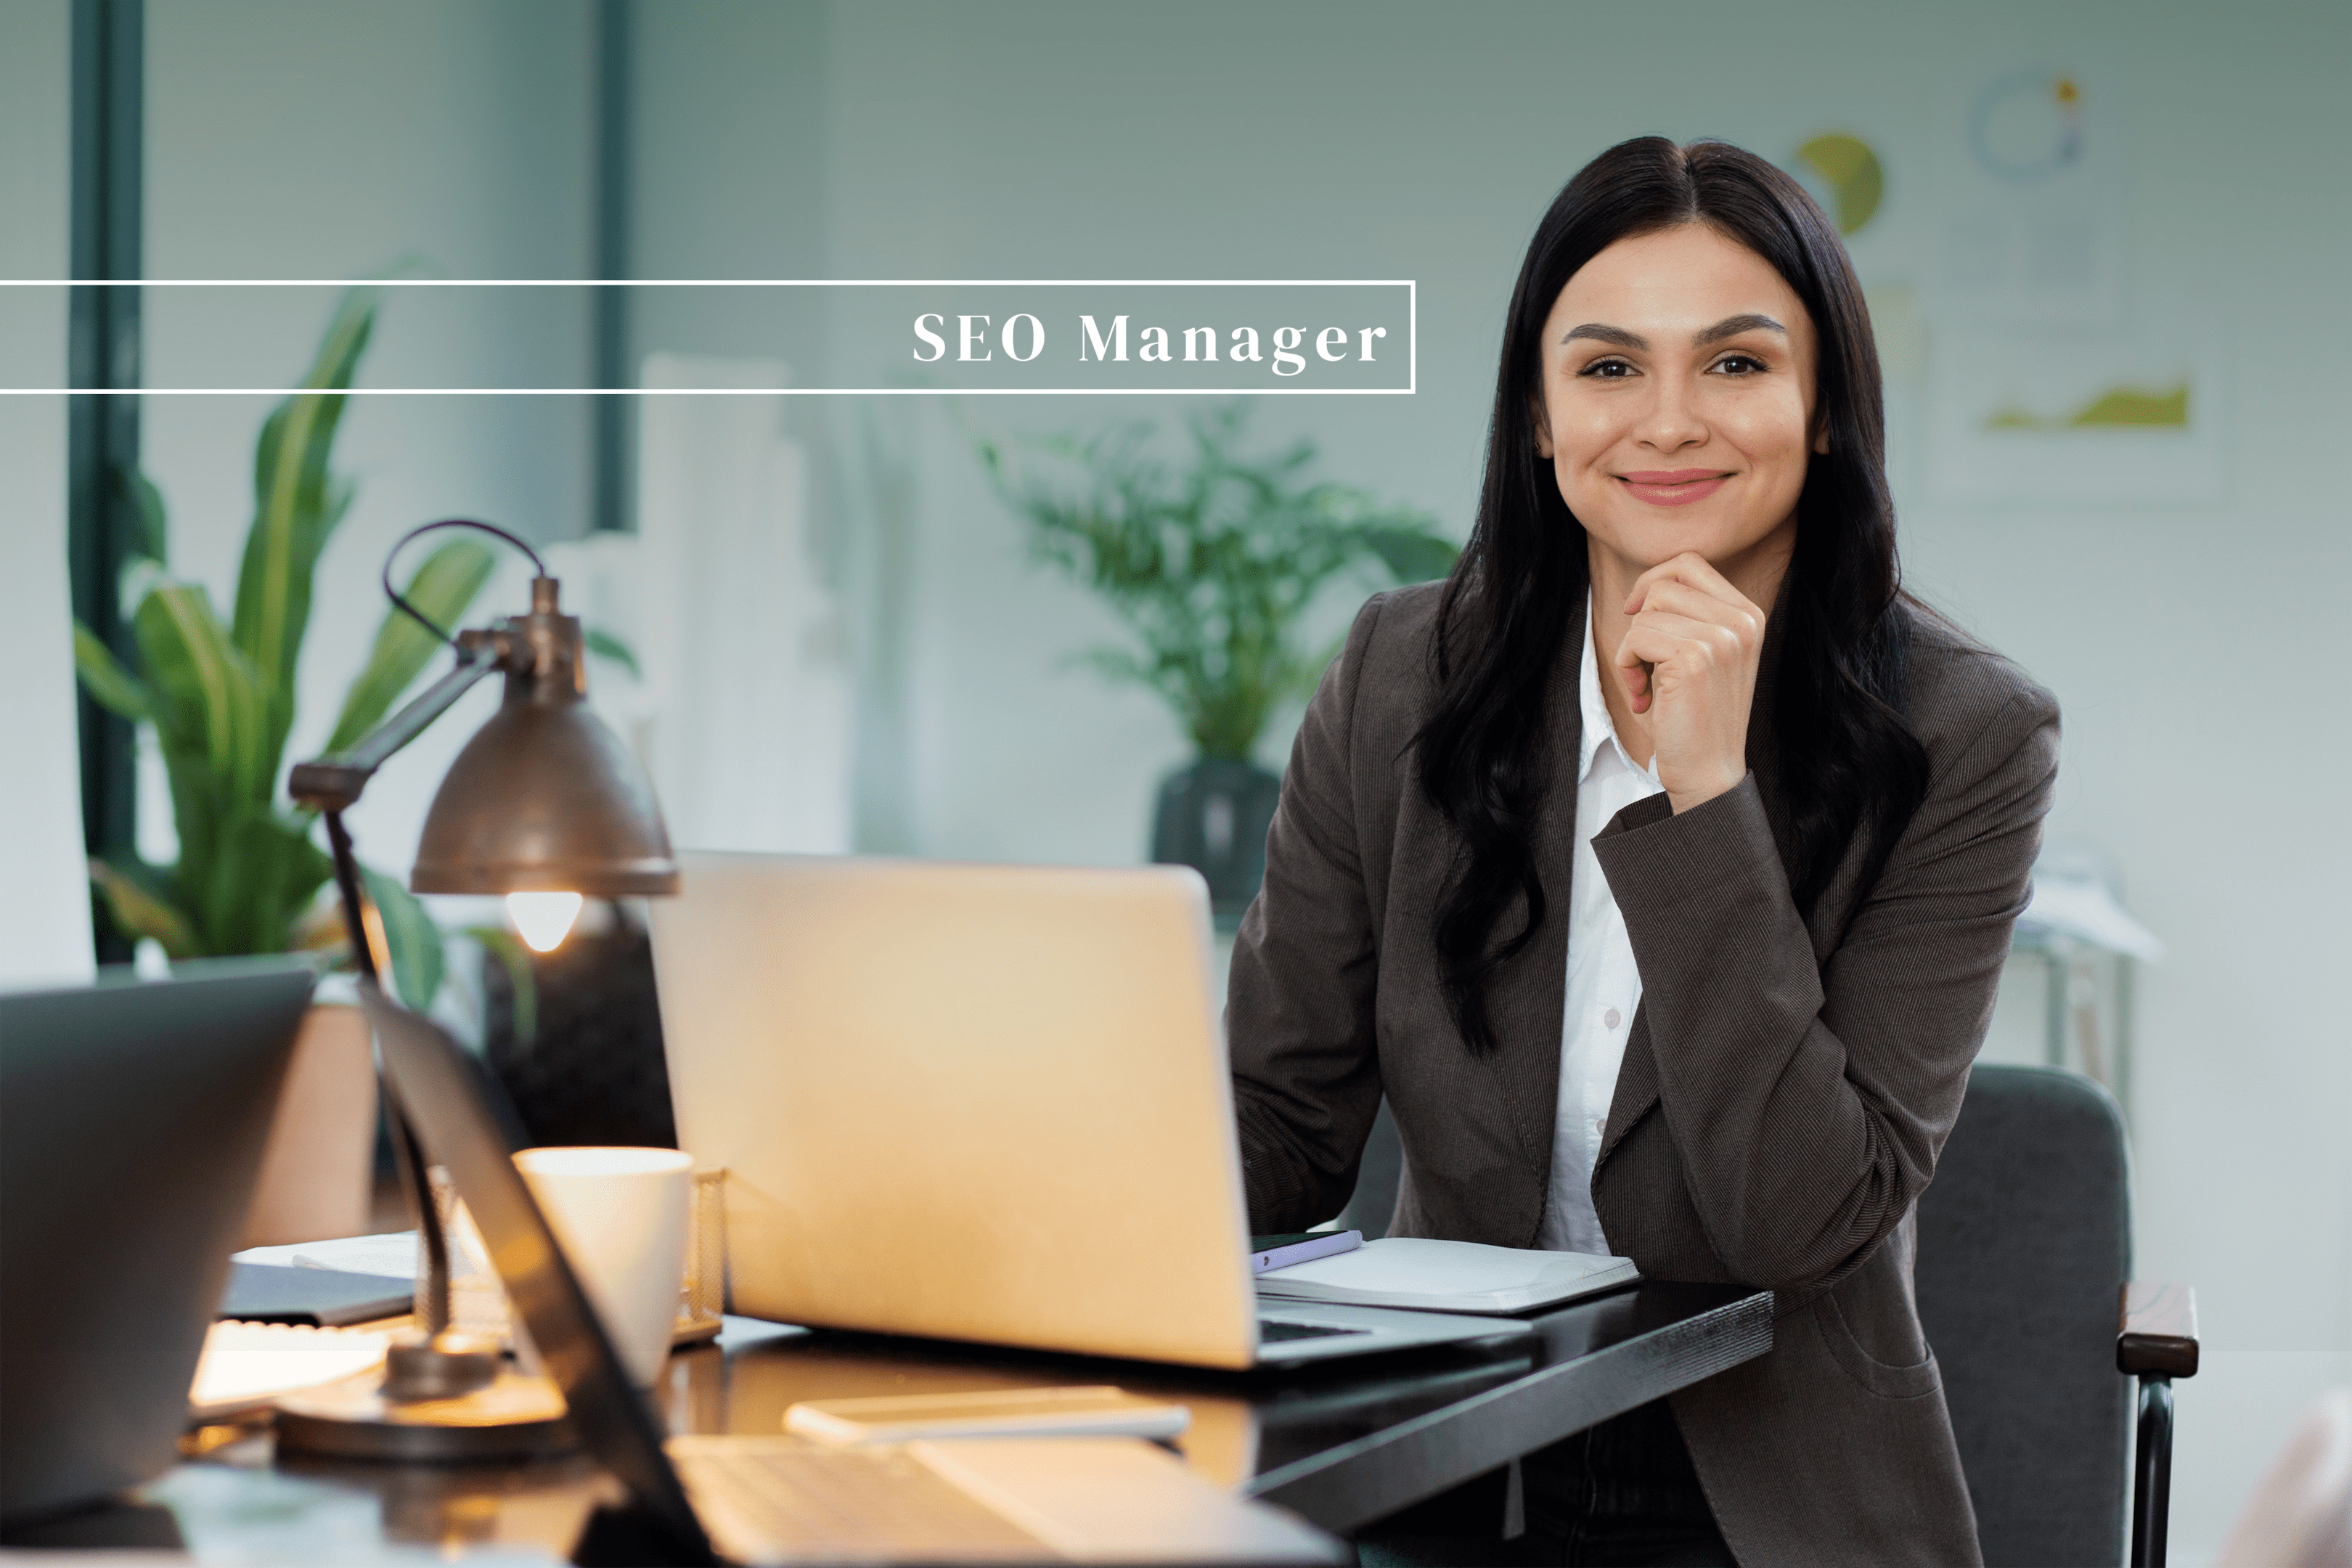 Confident female SEO Manager at her desk, optimizing law firm online presence.